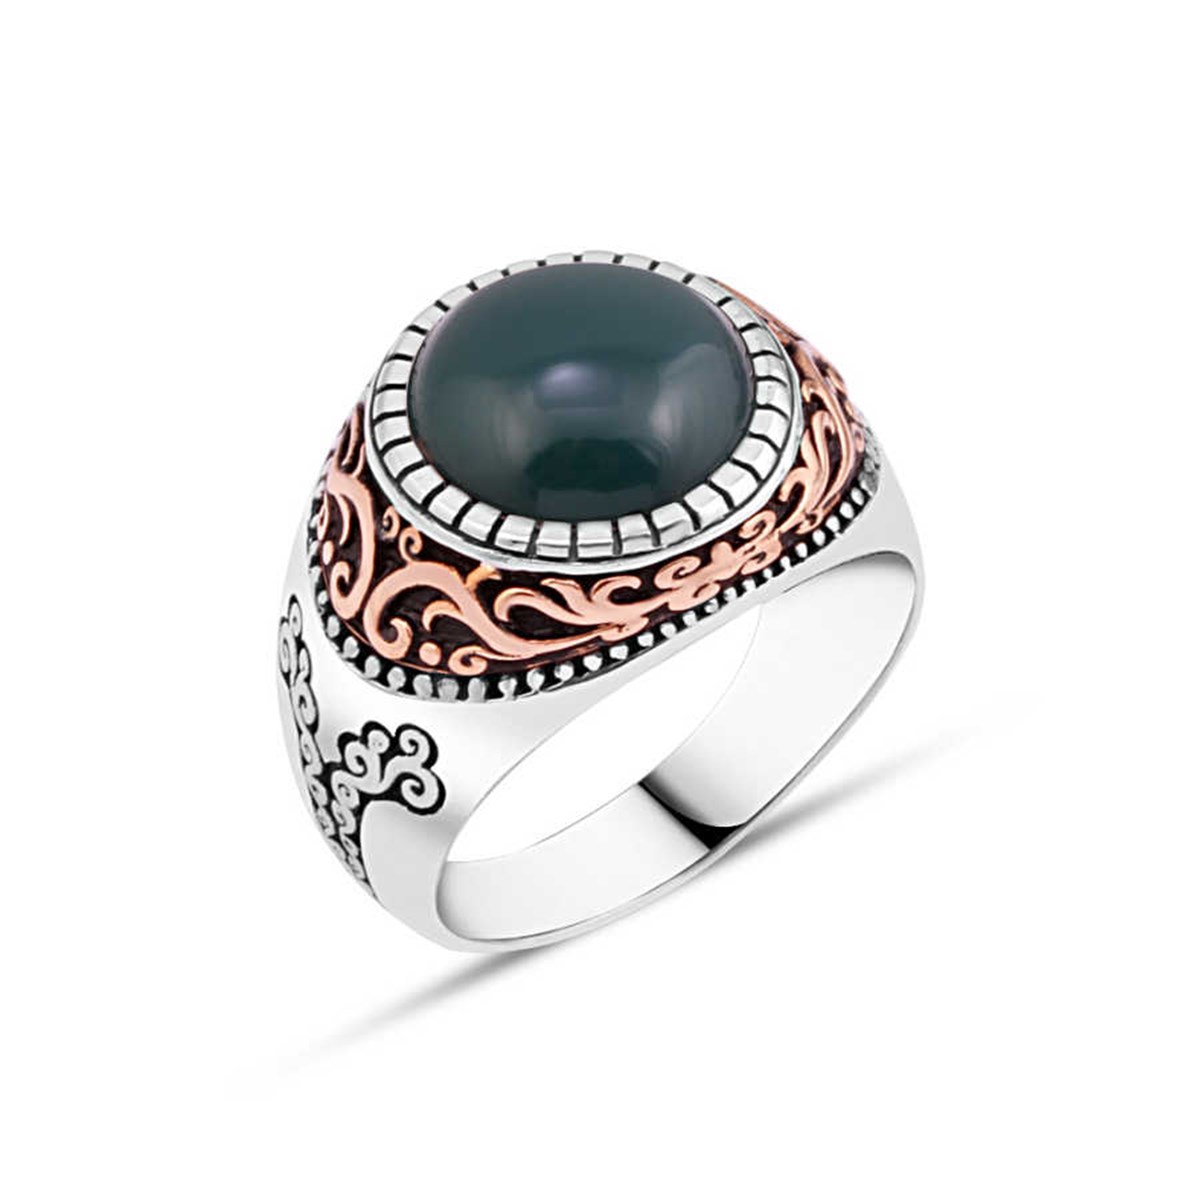 Green Agate Hood Stone Sterling Silver Men's Ring